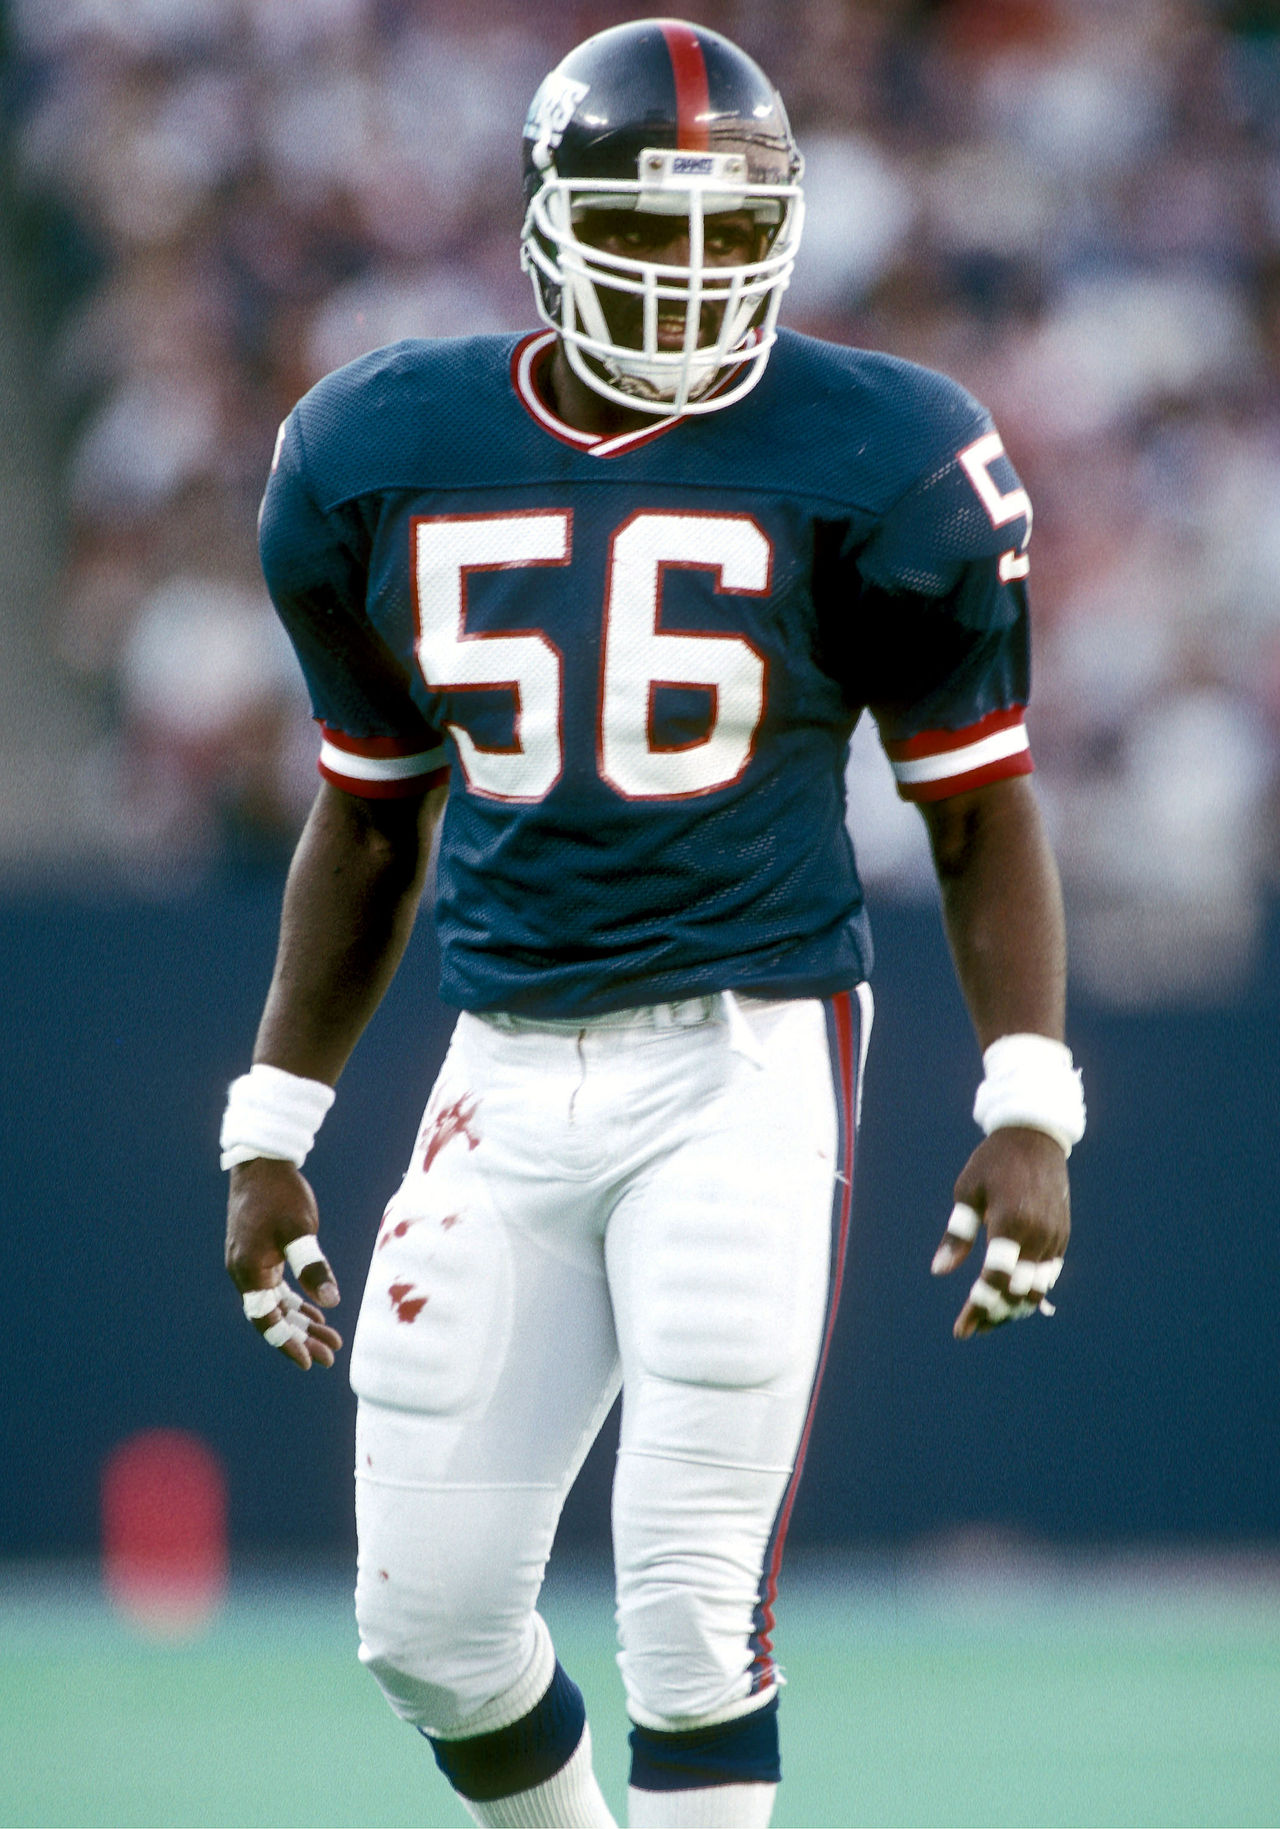 NFL.com Photos - Lawrence Taylor Through the Years